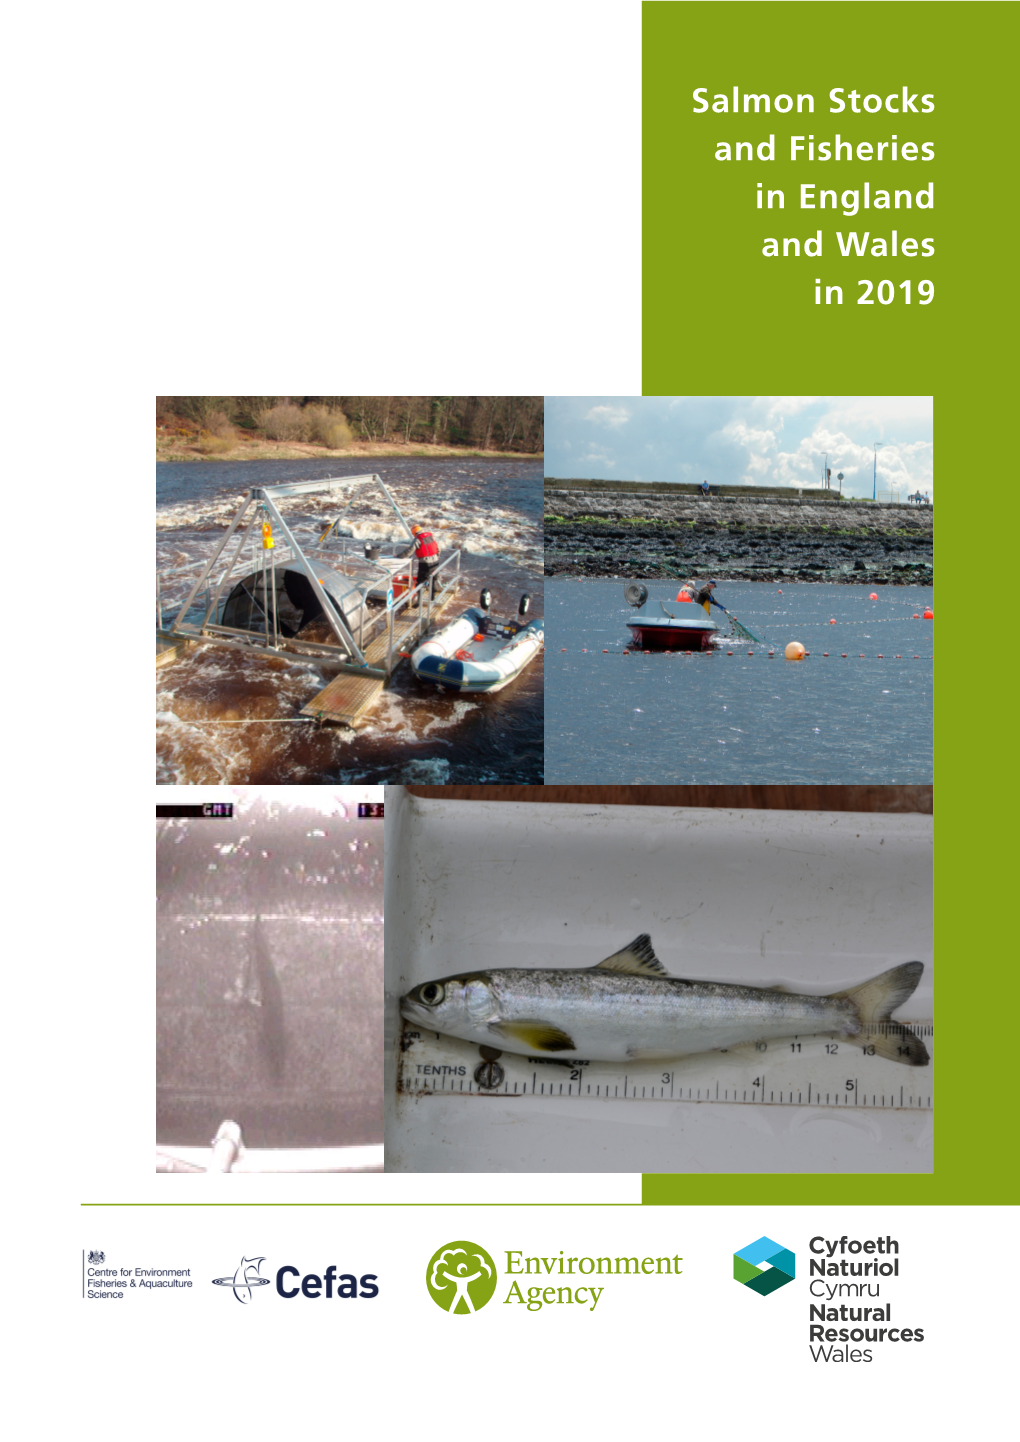 Salmon Stocks and Fisheries in England and Wales 2019